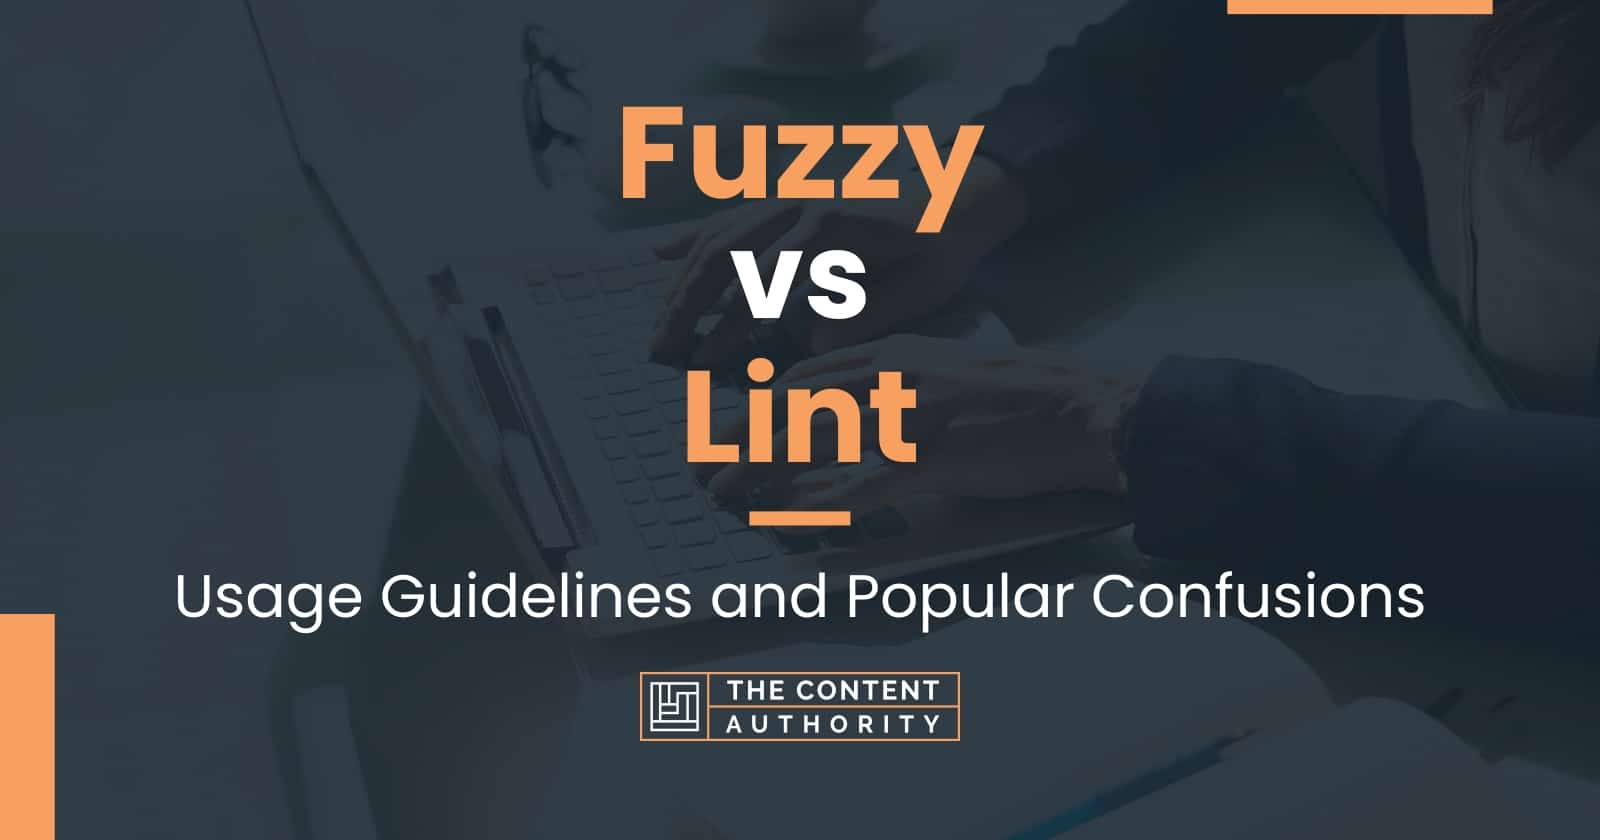 Fuzzy vs Lint: Usage Guidelines and Popular Confusions